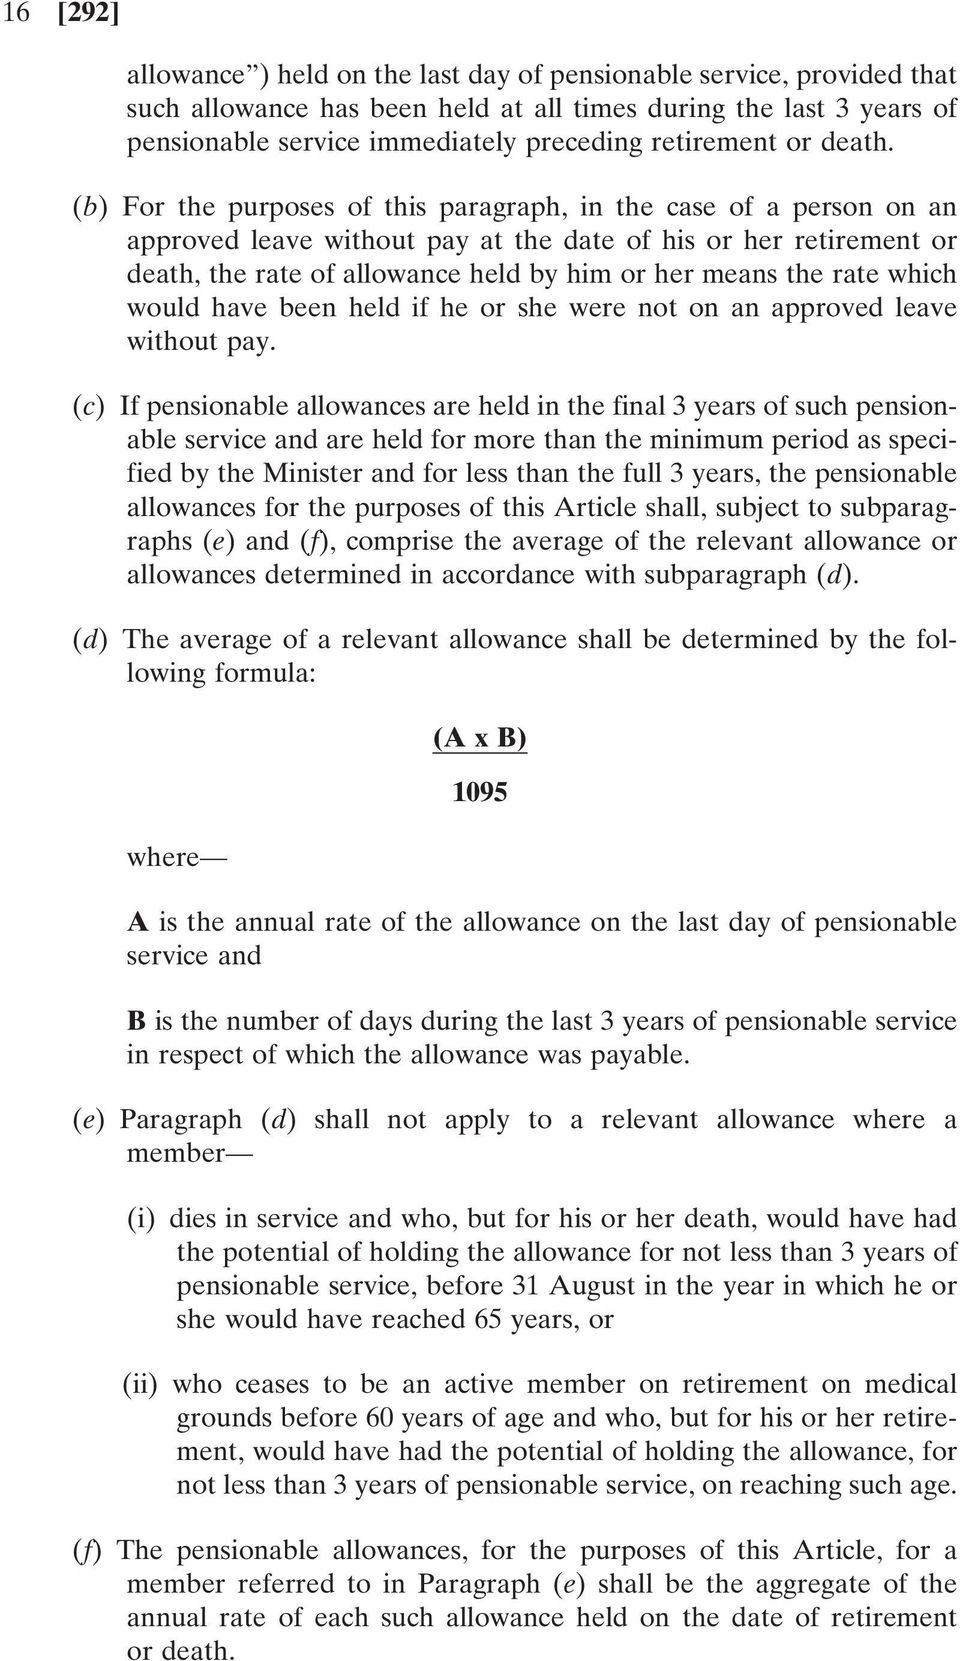 (b) For the purposes of this paragraph, in the case of a person on an approved leave without pay at the date of his or her retirement or death, the rate of allowance held by him or her means the rate